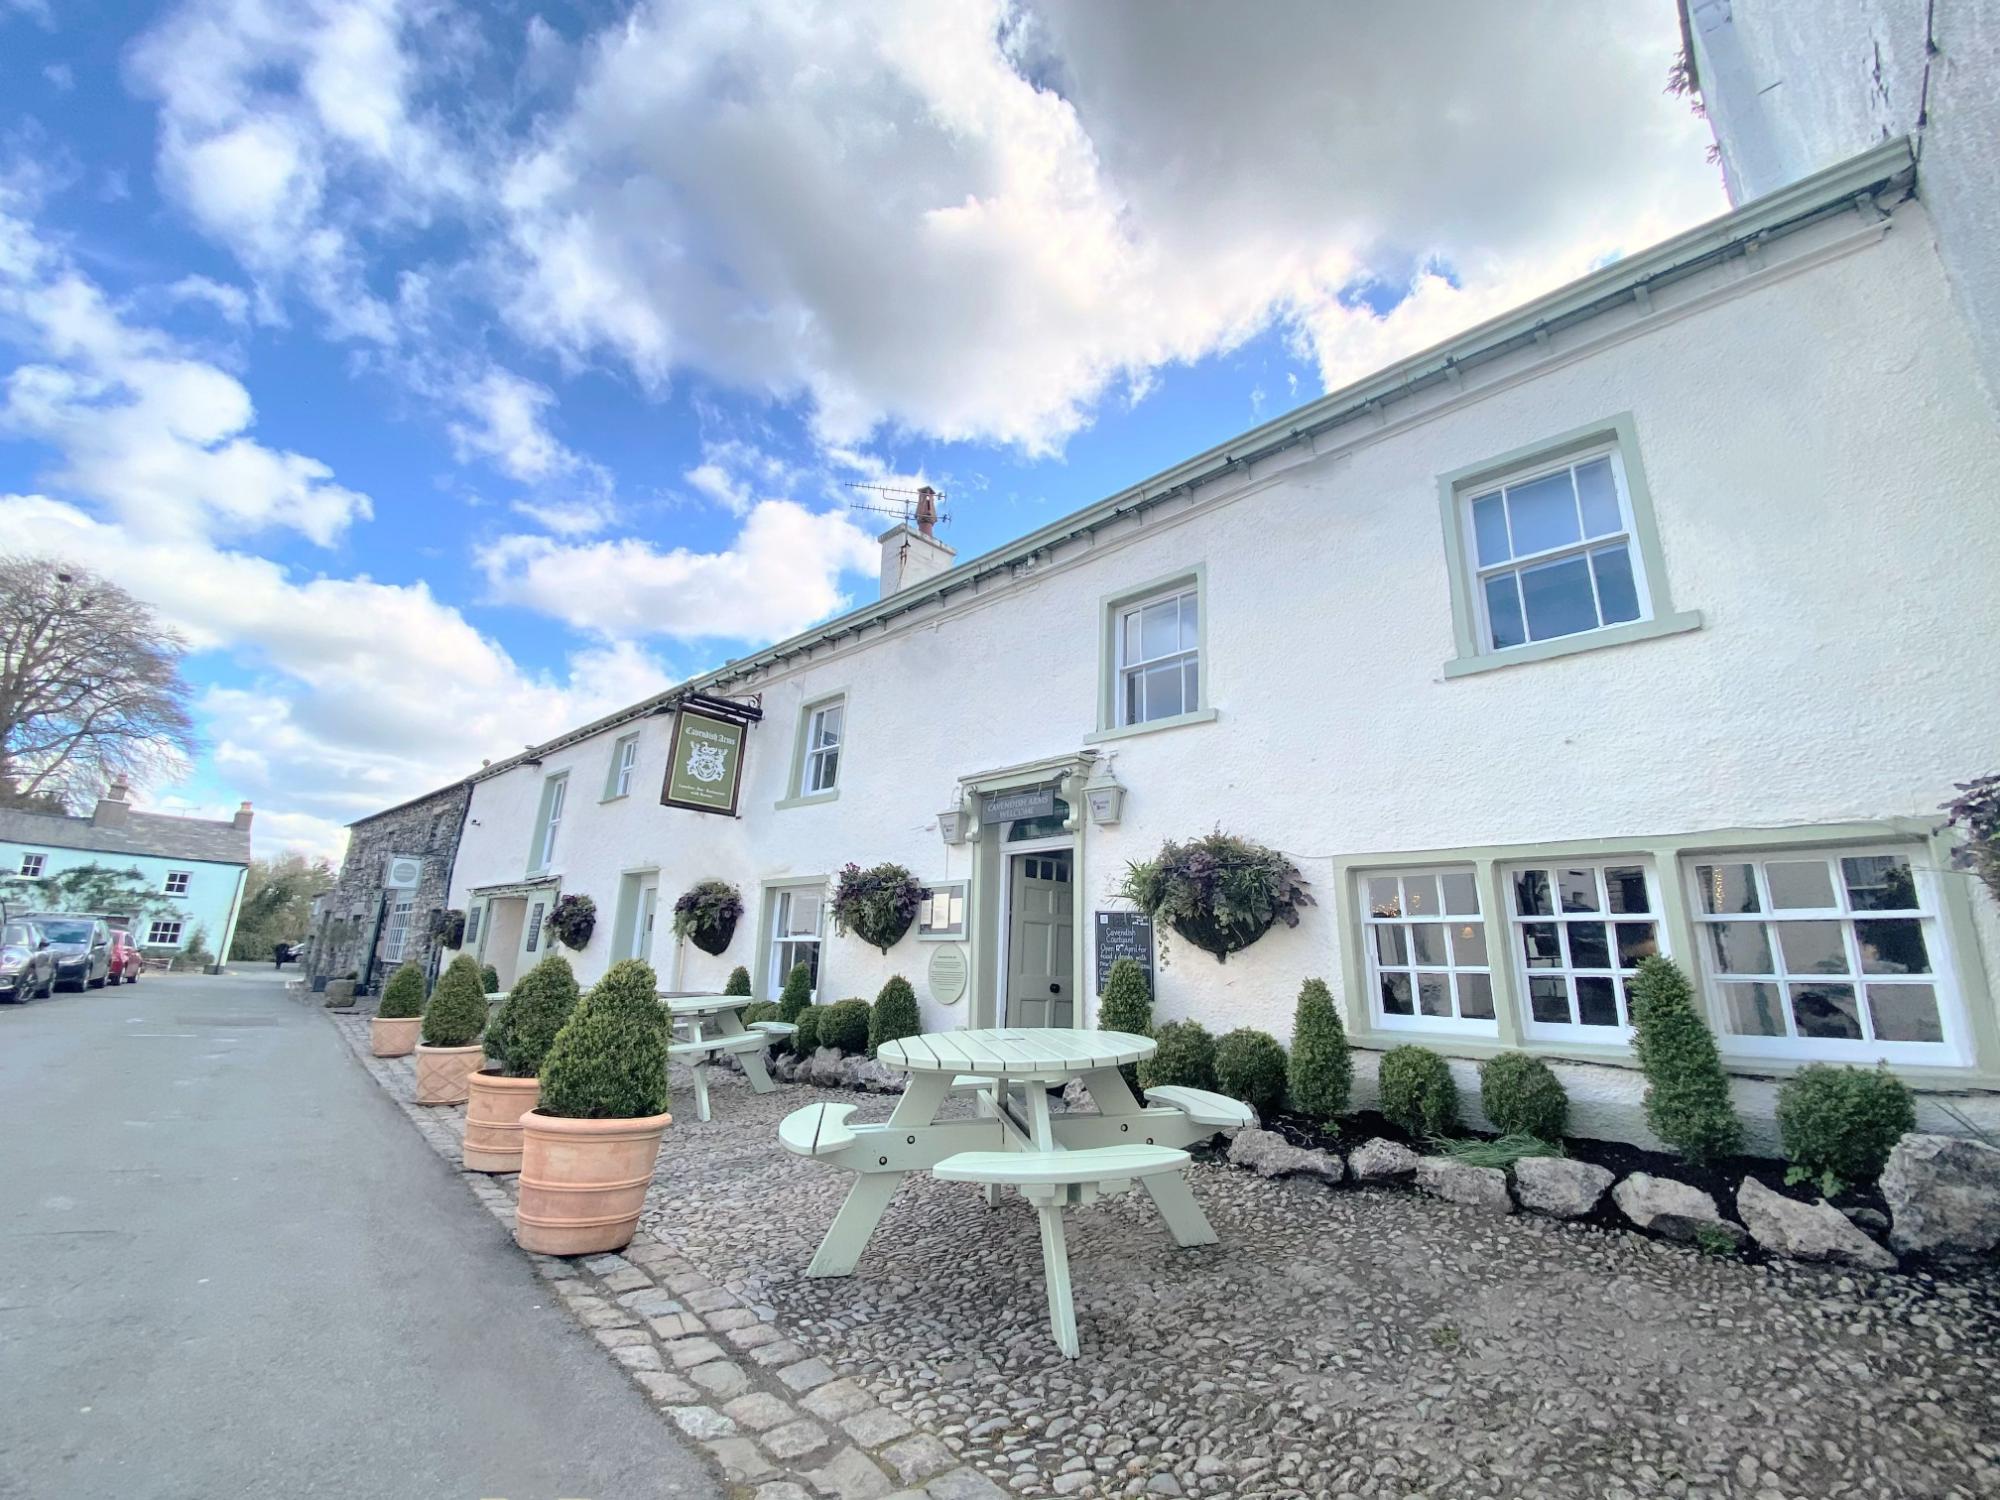 Hotels in Cartmel holidays at Cool Places